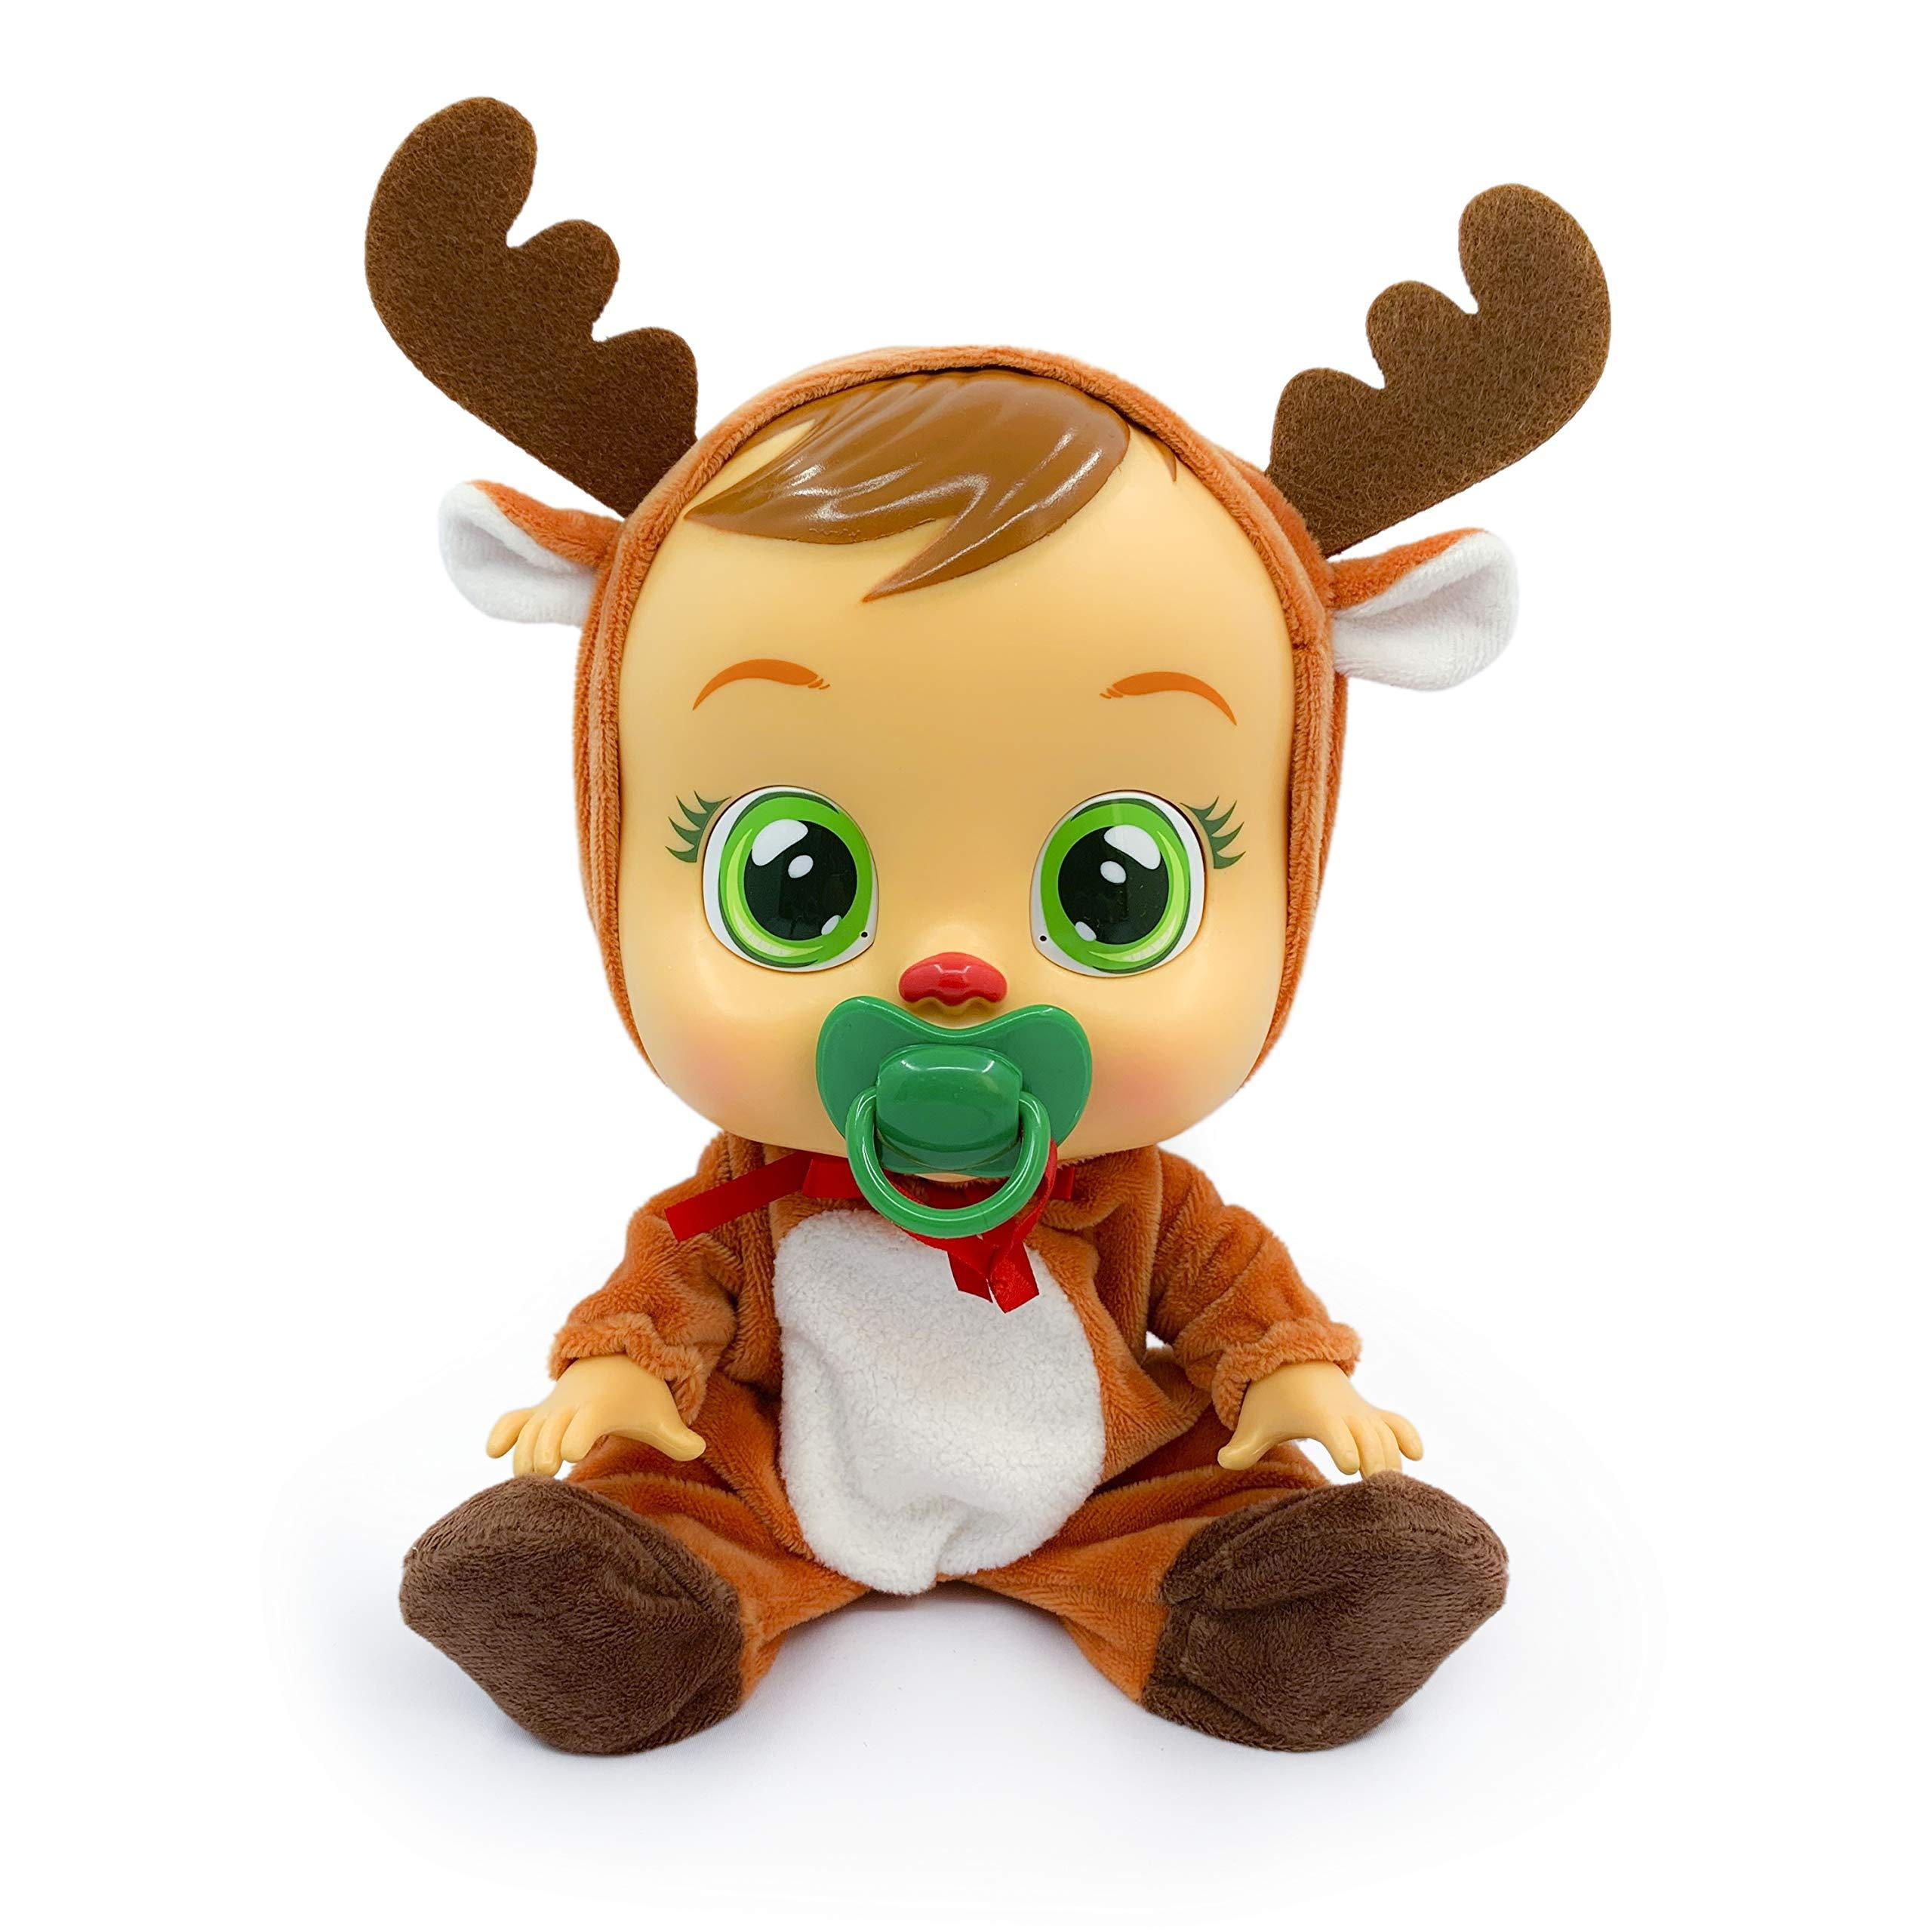 Cry Babies Ruthy The Reindeer Doll Toy Gift Free Shipping 